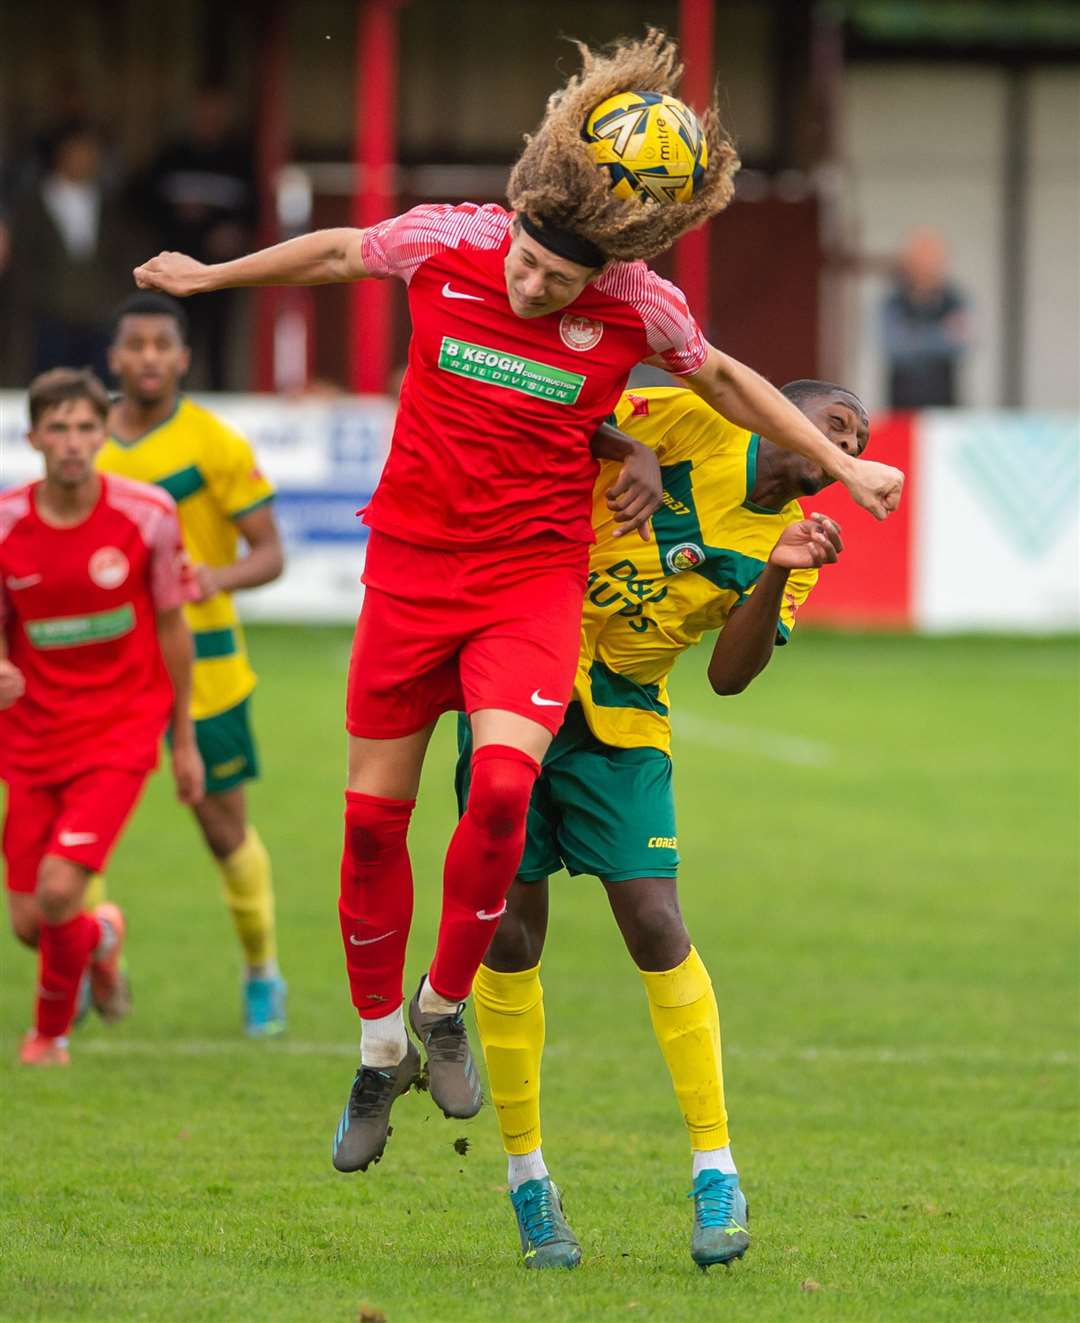 What a picture of ex-Ashford man Jarred Trespaderne, who's back in Hythe colours this season. Picture: Ian Scammell